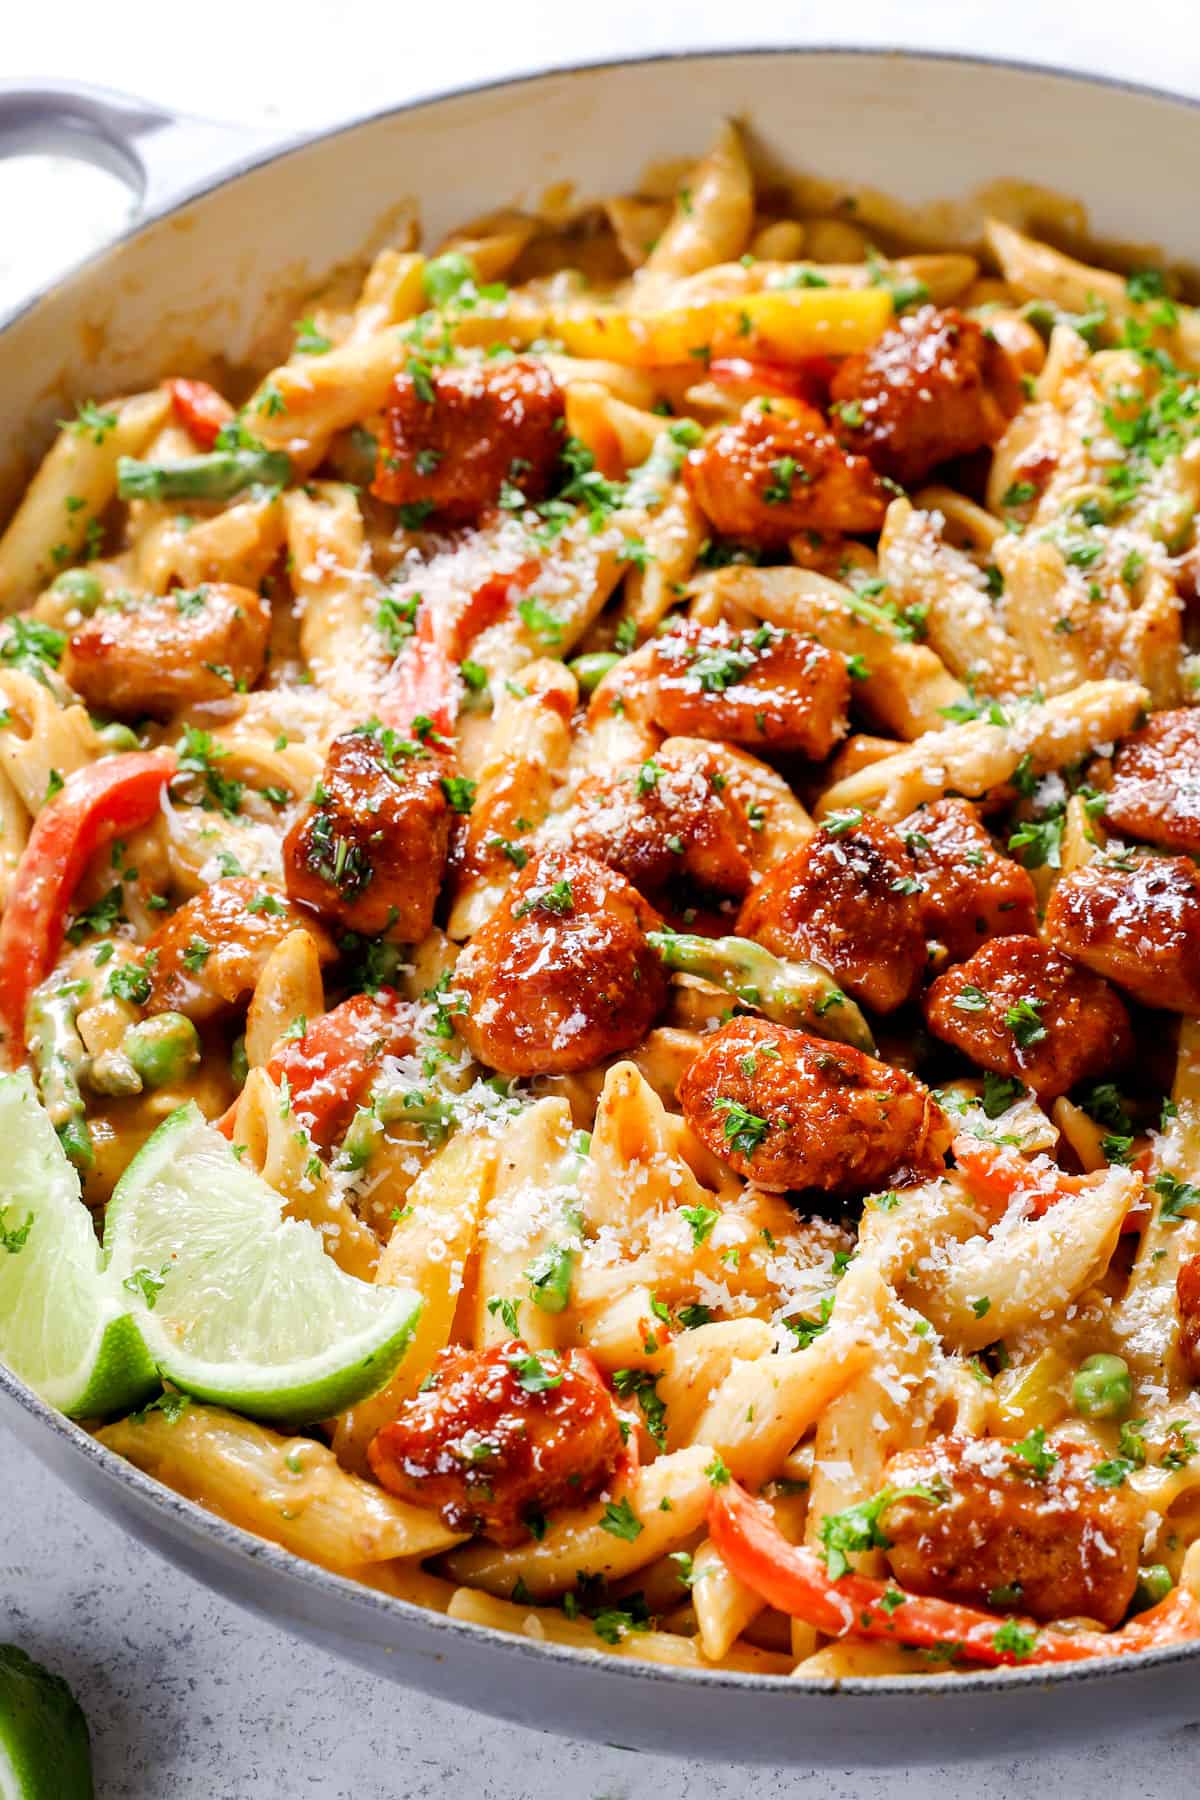 showing how to make spicy chicken chipotle pasta by combining chipotle chicken, asparagus, peas, bell peppers, and pasta in a chipotle cheesy sauce